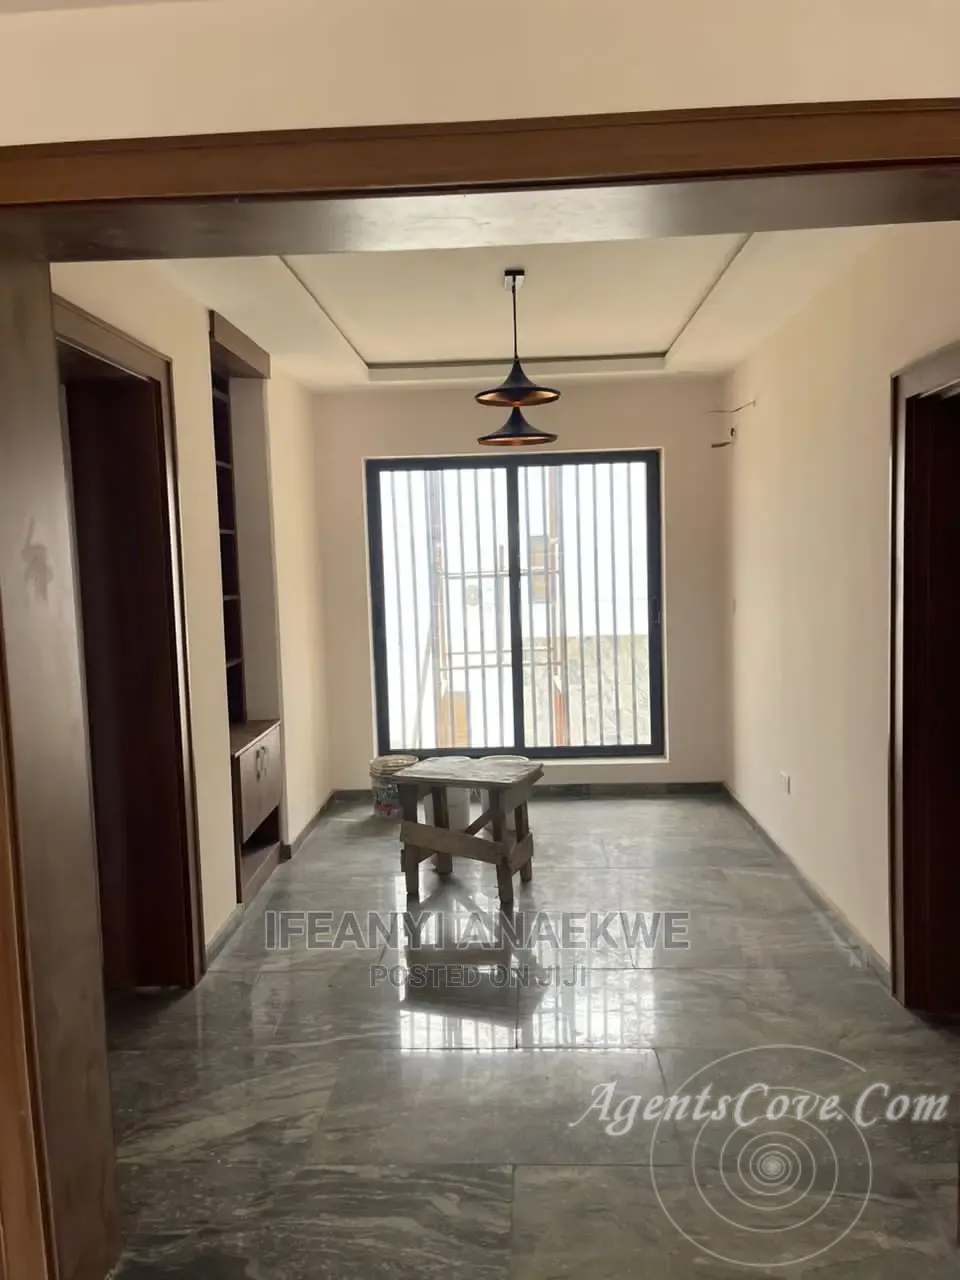 2bdrm Block Of Flats In Jahi For Sale